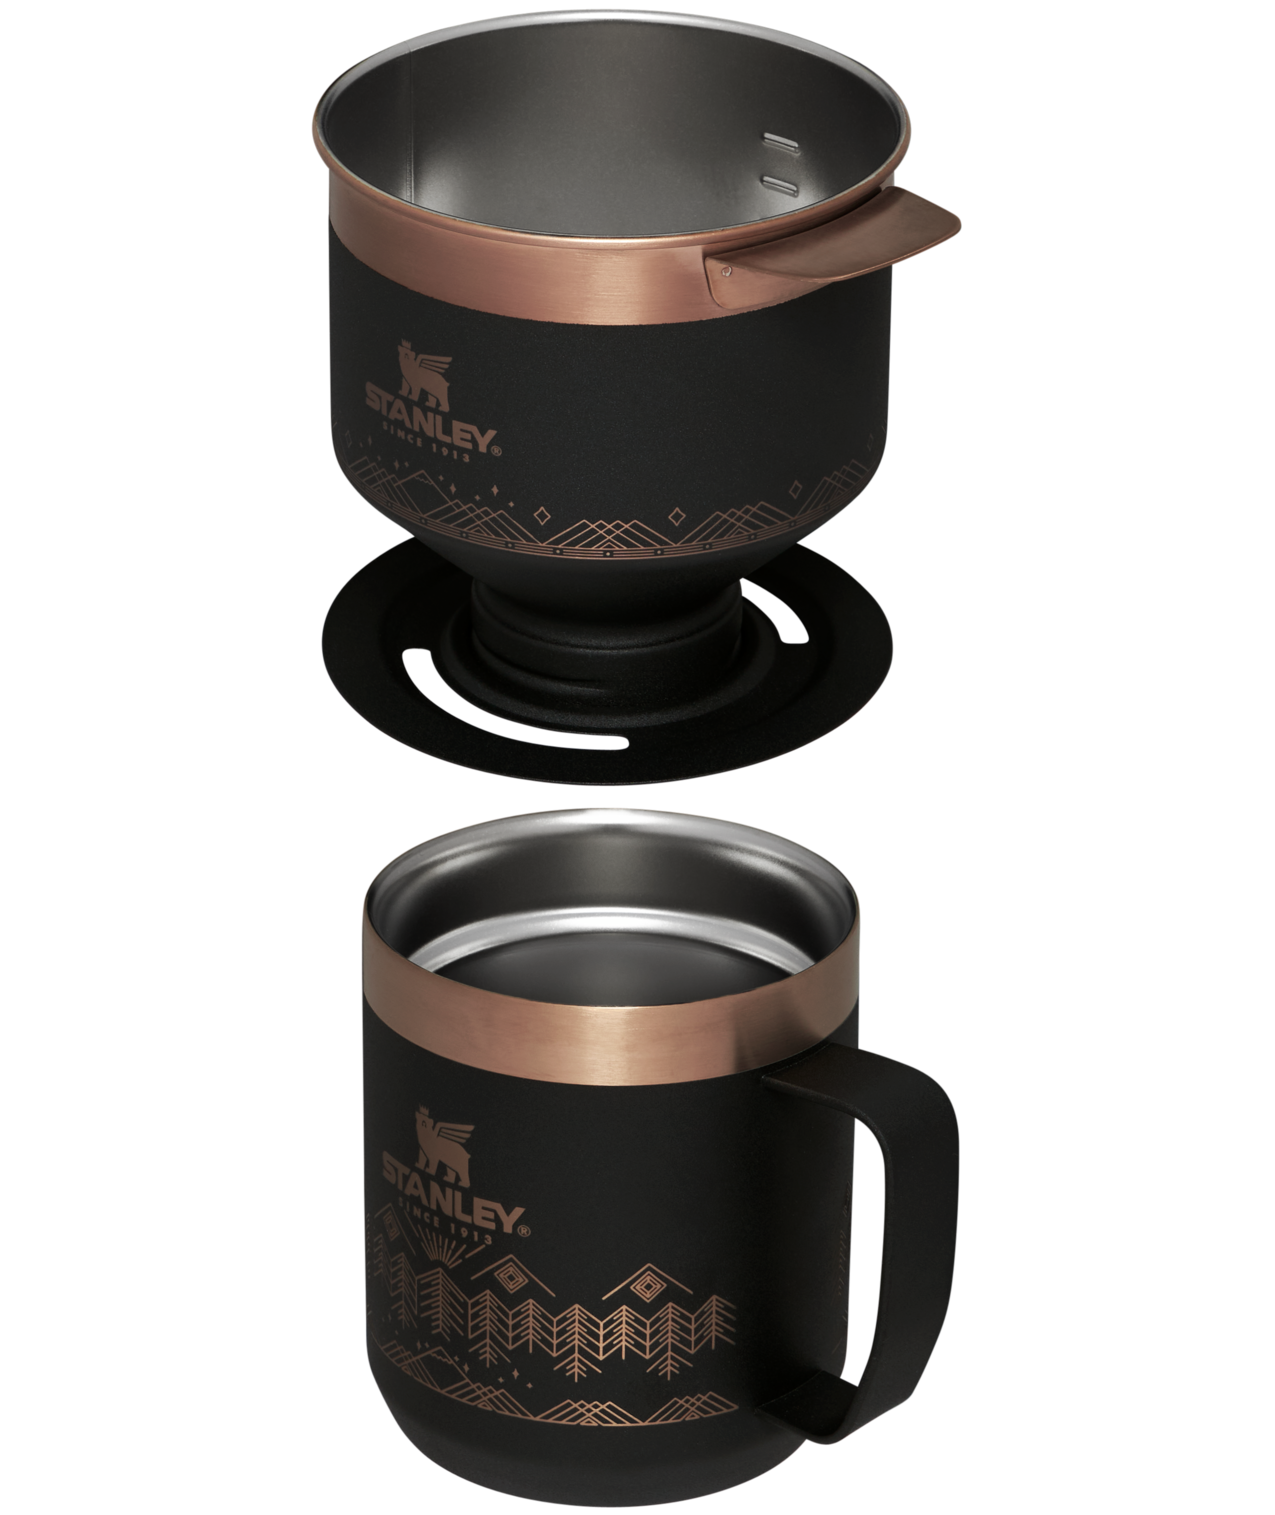 https://img-va.myshopline.com/image/store/1700619397492/B2B-Web-PNG-The-Perfect-Brew-Pour-Over-Set-12OZ-Foundry-Black-Winterscape-Hero-Exploded.png?w=1275&h=1515